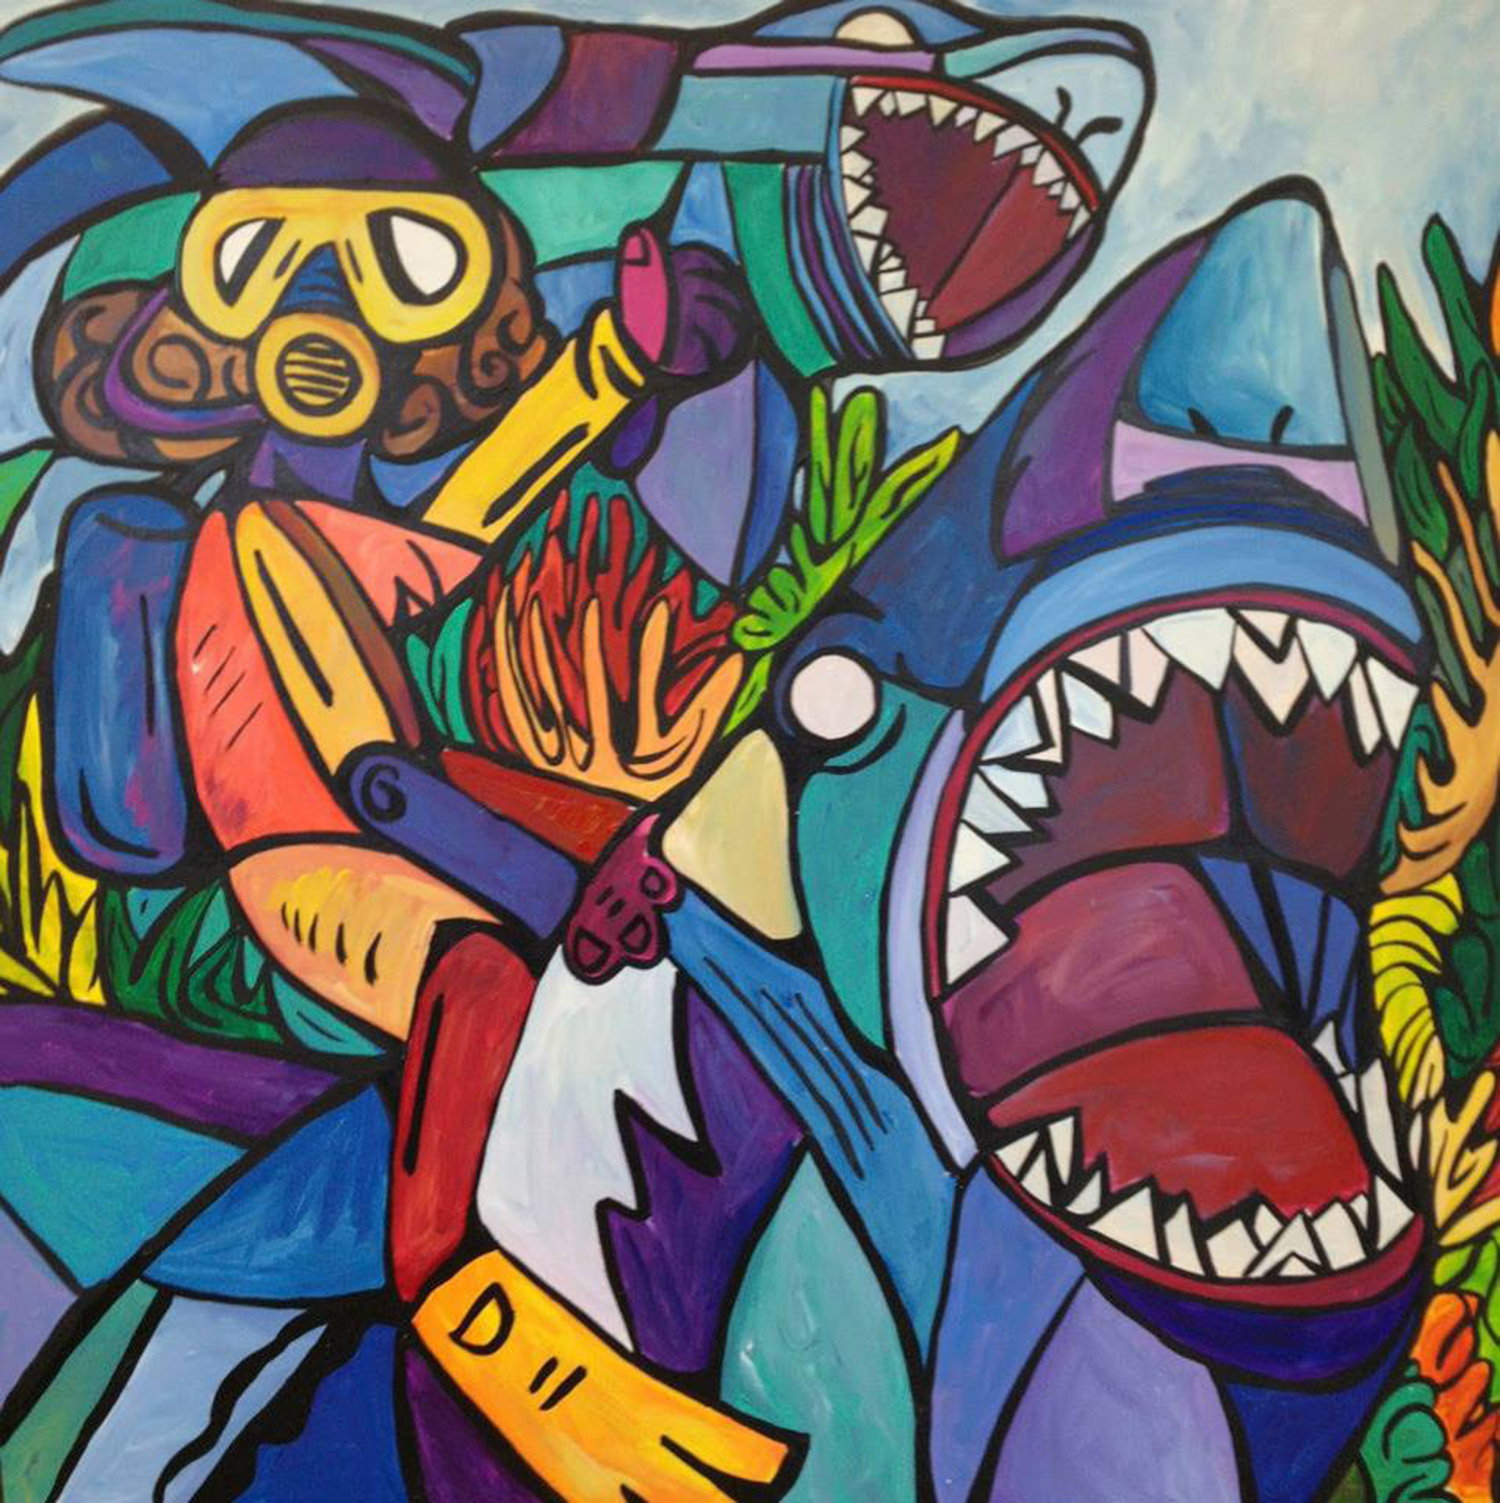 pop art-inspired painting with heavy lines and vibrant colors of a person in scuba gear riding on a shark's back. Image by Courtney Huston